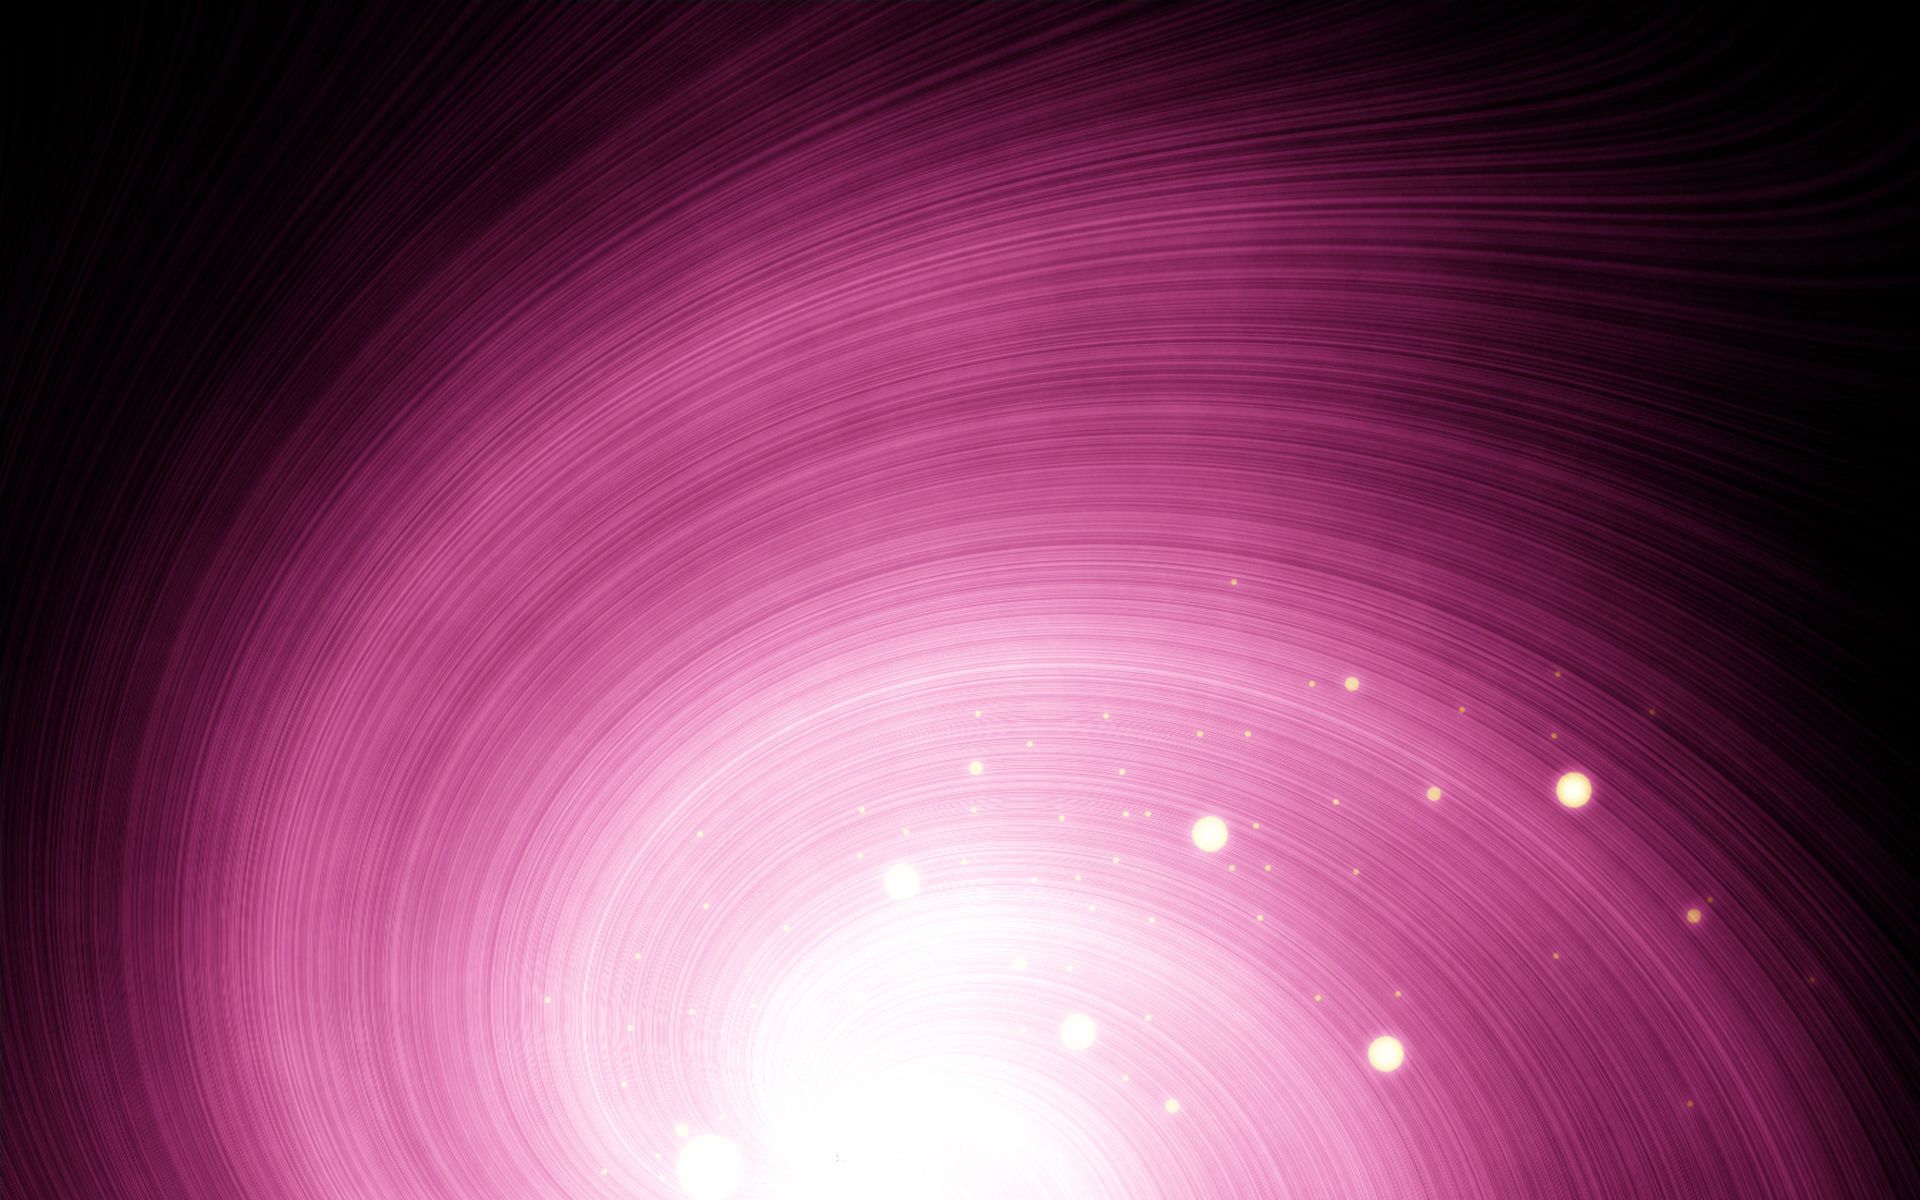 HD wallpaper shine, abstract, violet, light, bright, rotation, purple, funnel